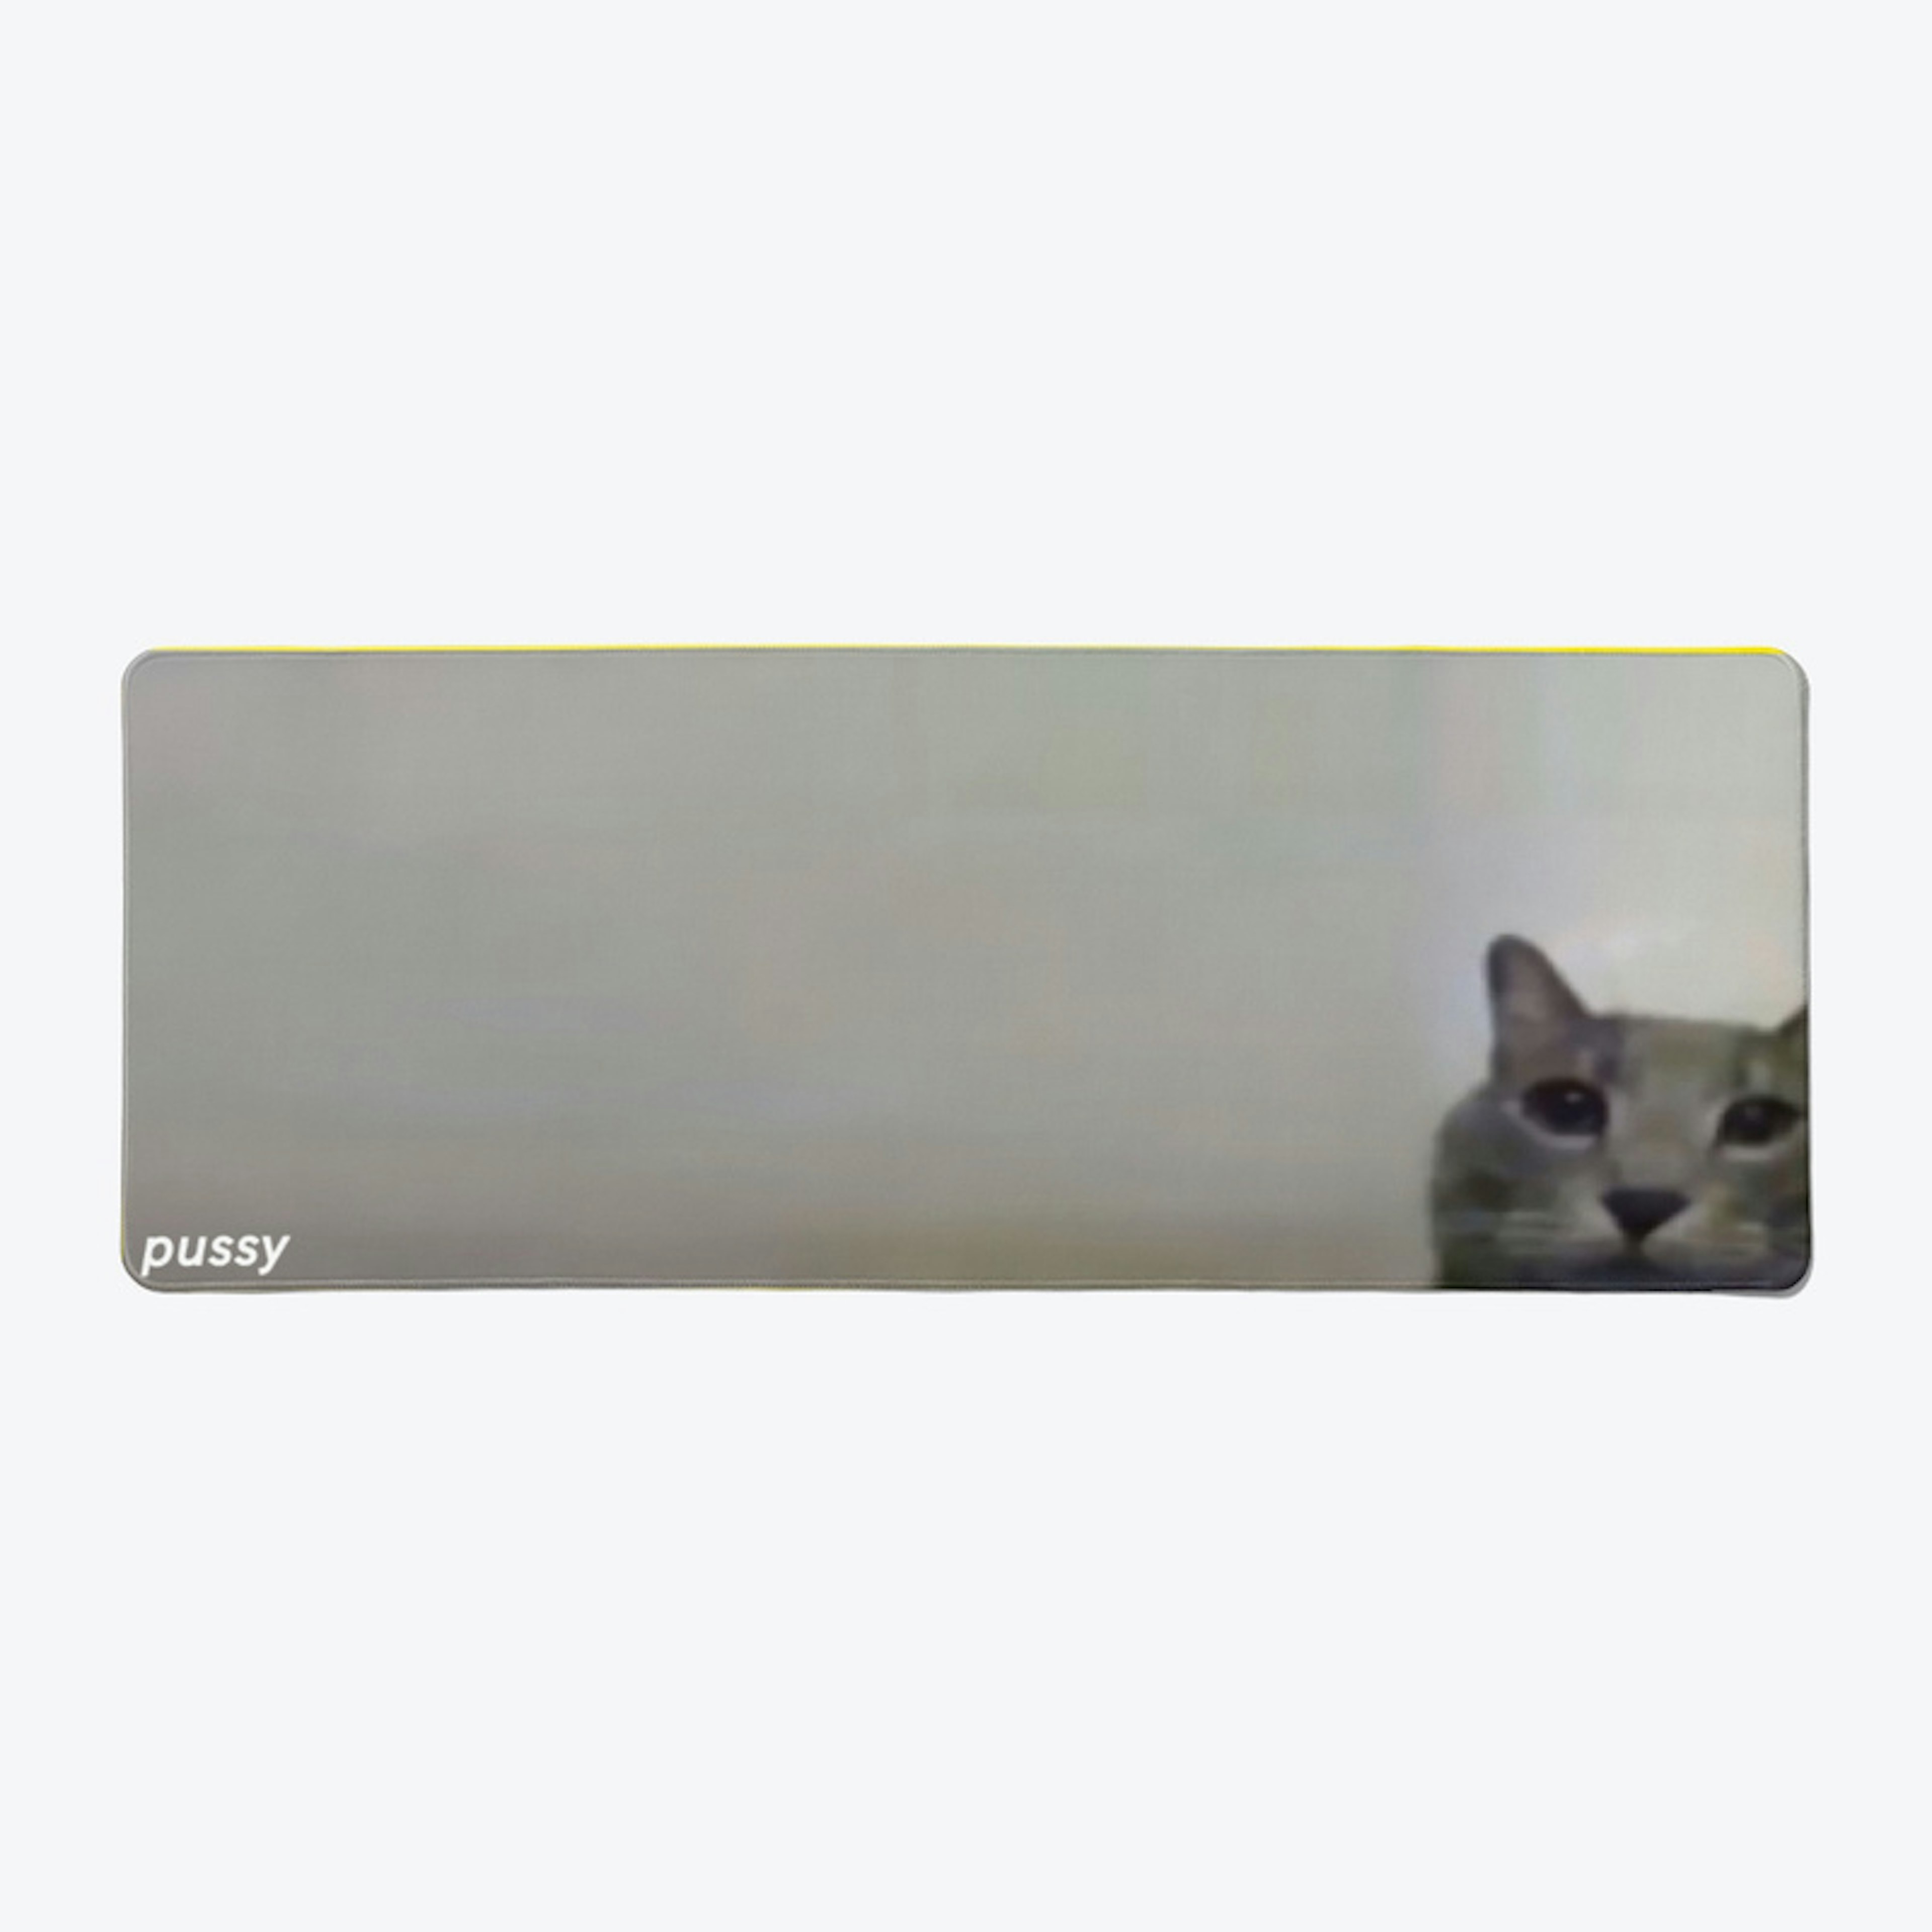 Would you buy this mousepad?